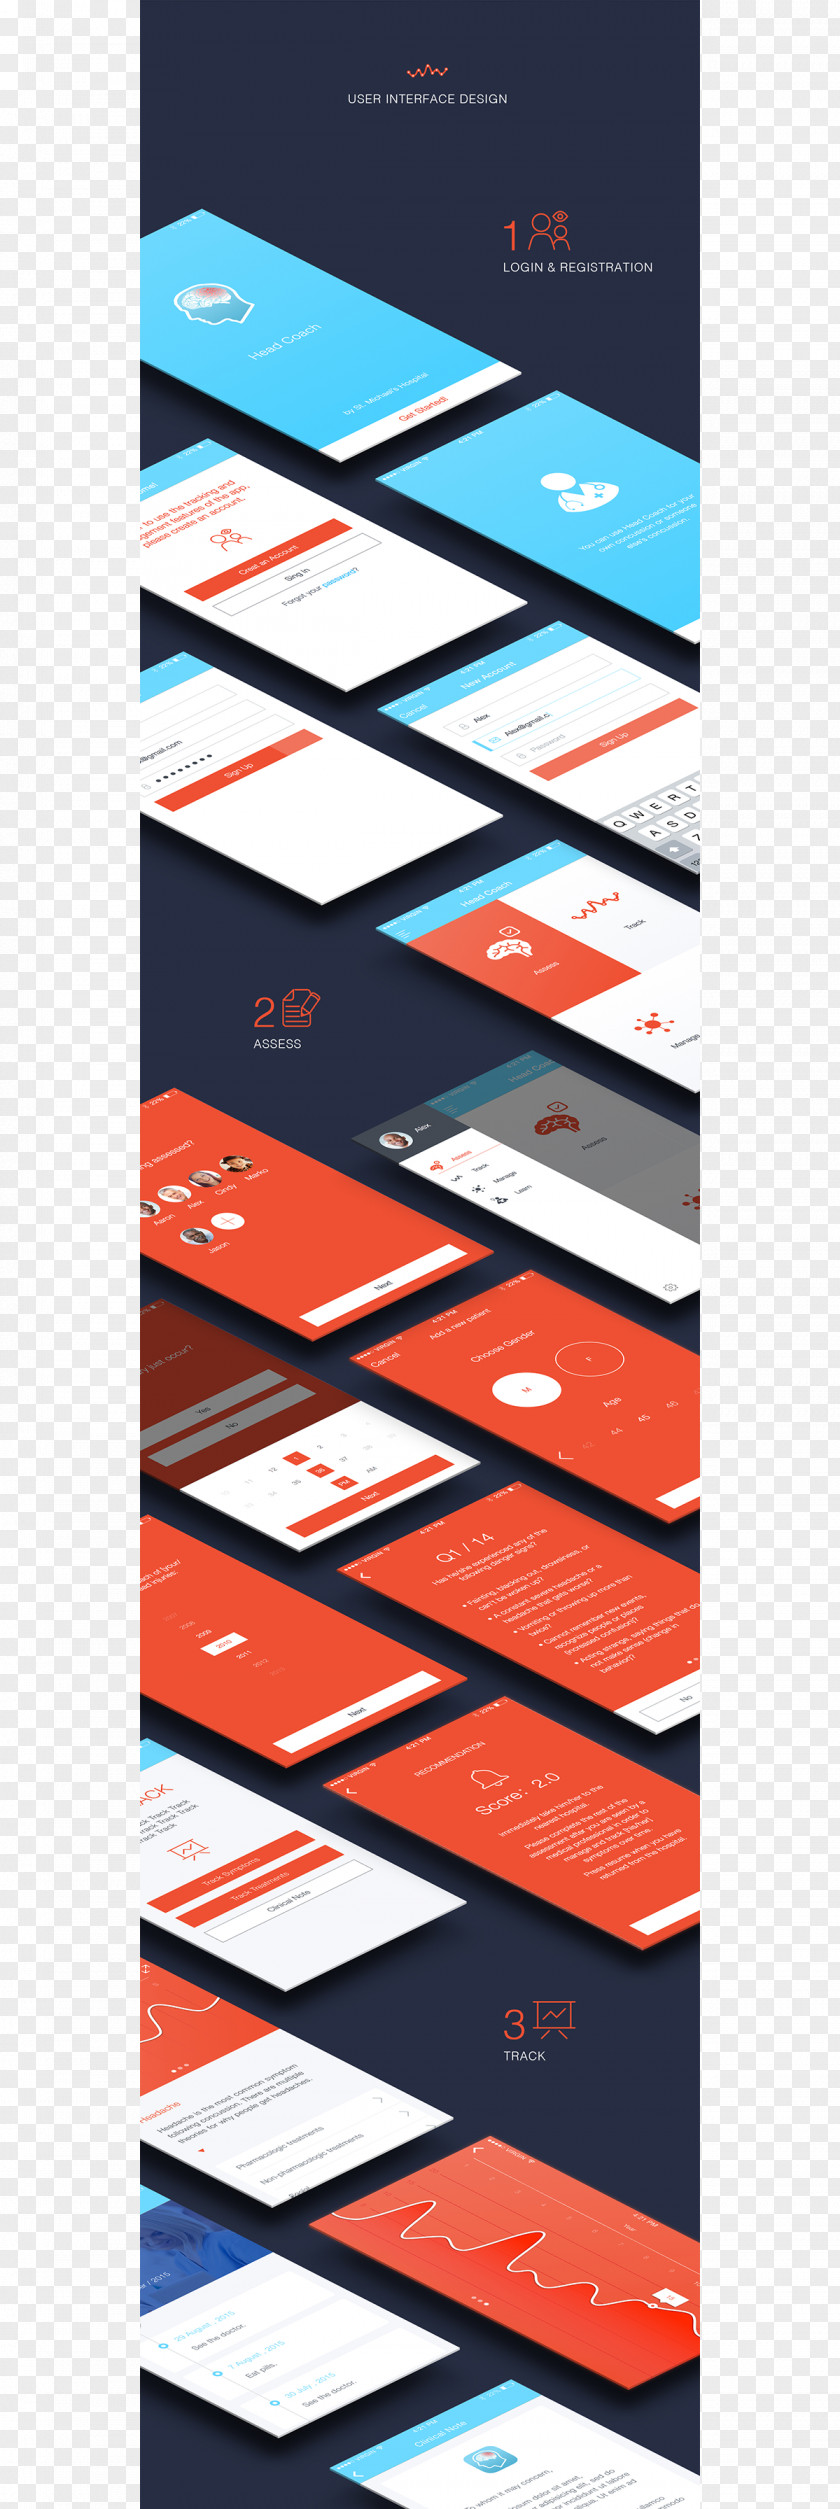 Design User Interface Graphical PNG